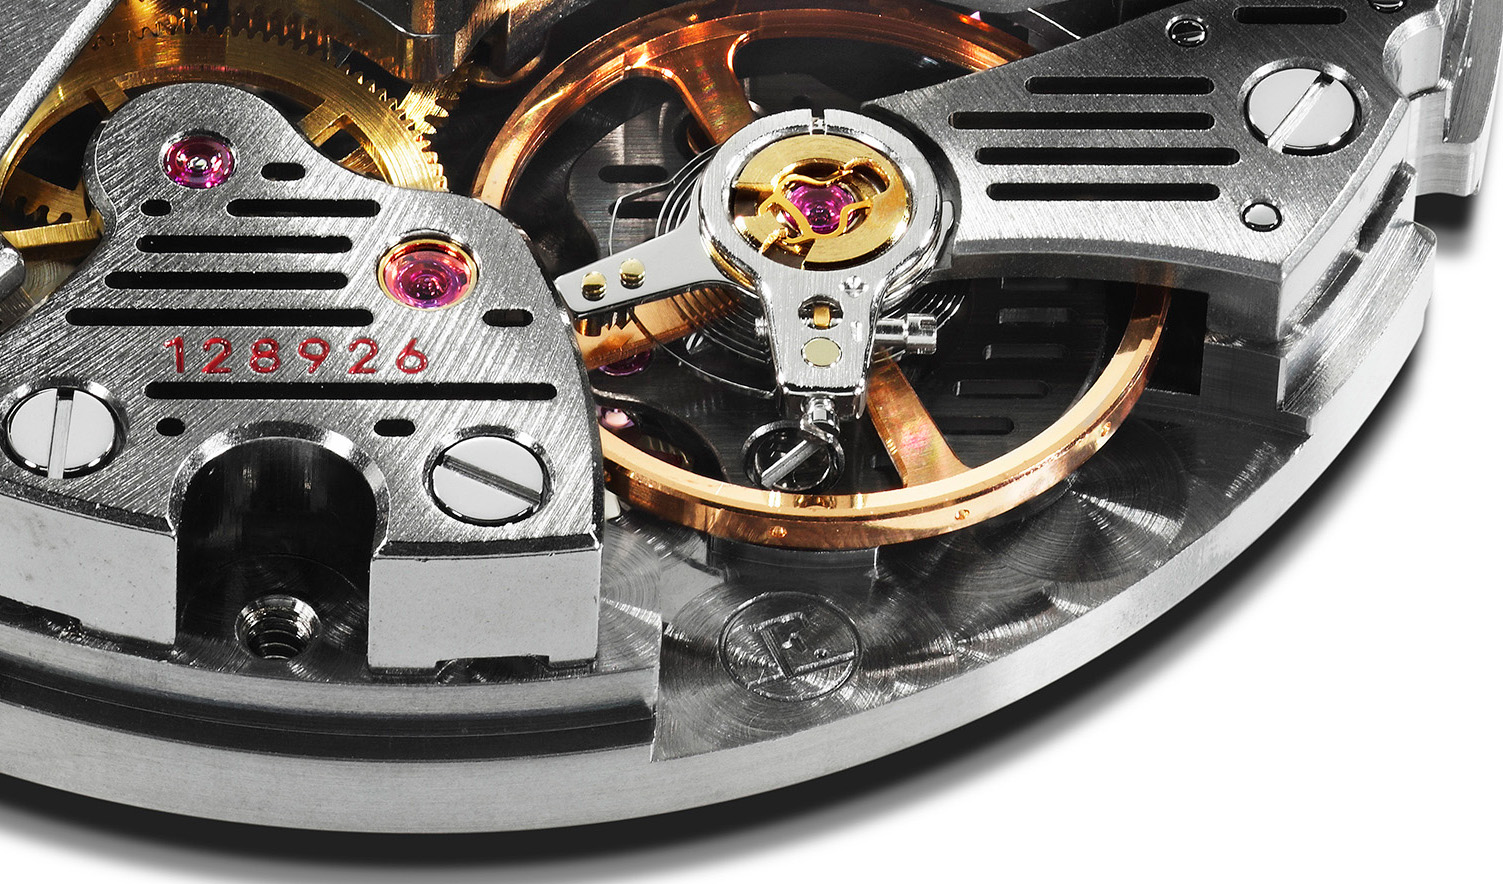 The "F" right below the balance wheel is a mark of Fleurier Ebauches SA and a sign of superlative quality from Chopard.